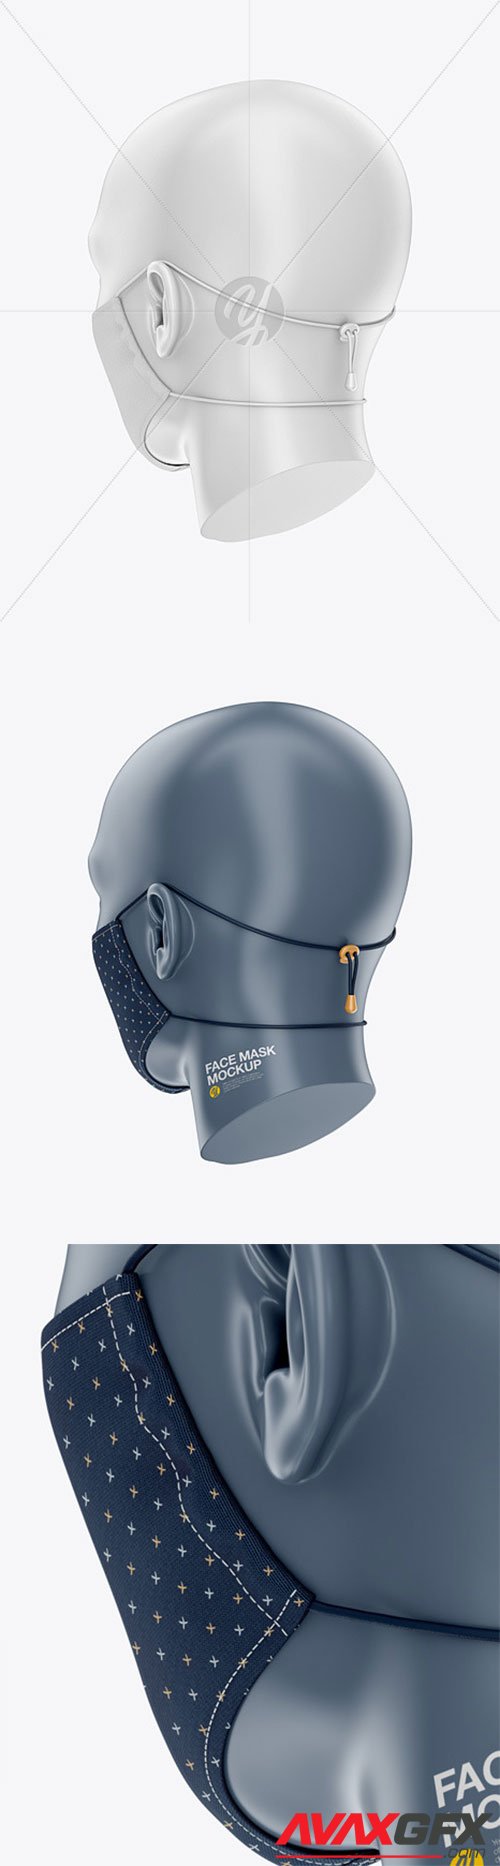 Face Mask with Elastic Cord and Stopper - Back Half-Side View 62553